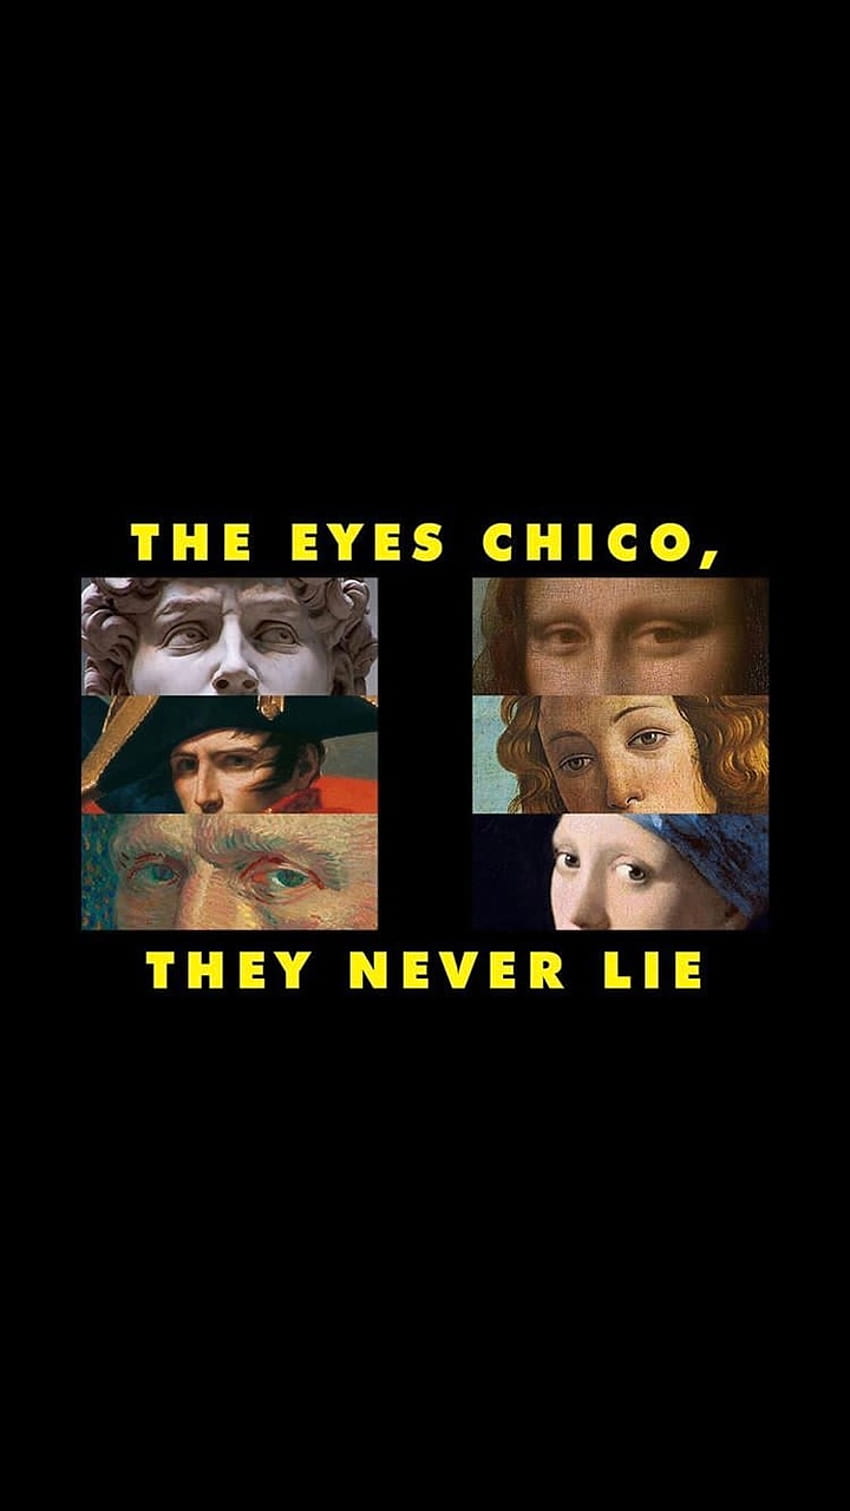 The eyes chico, they never lie HD phone wallpaper